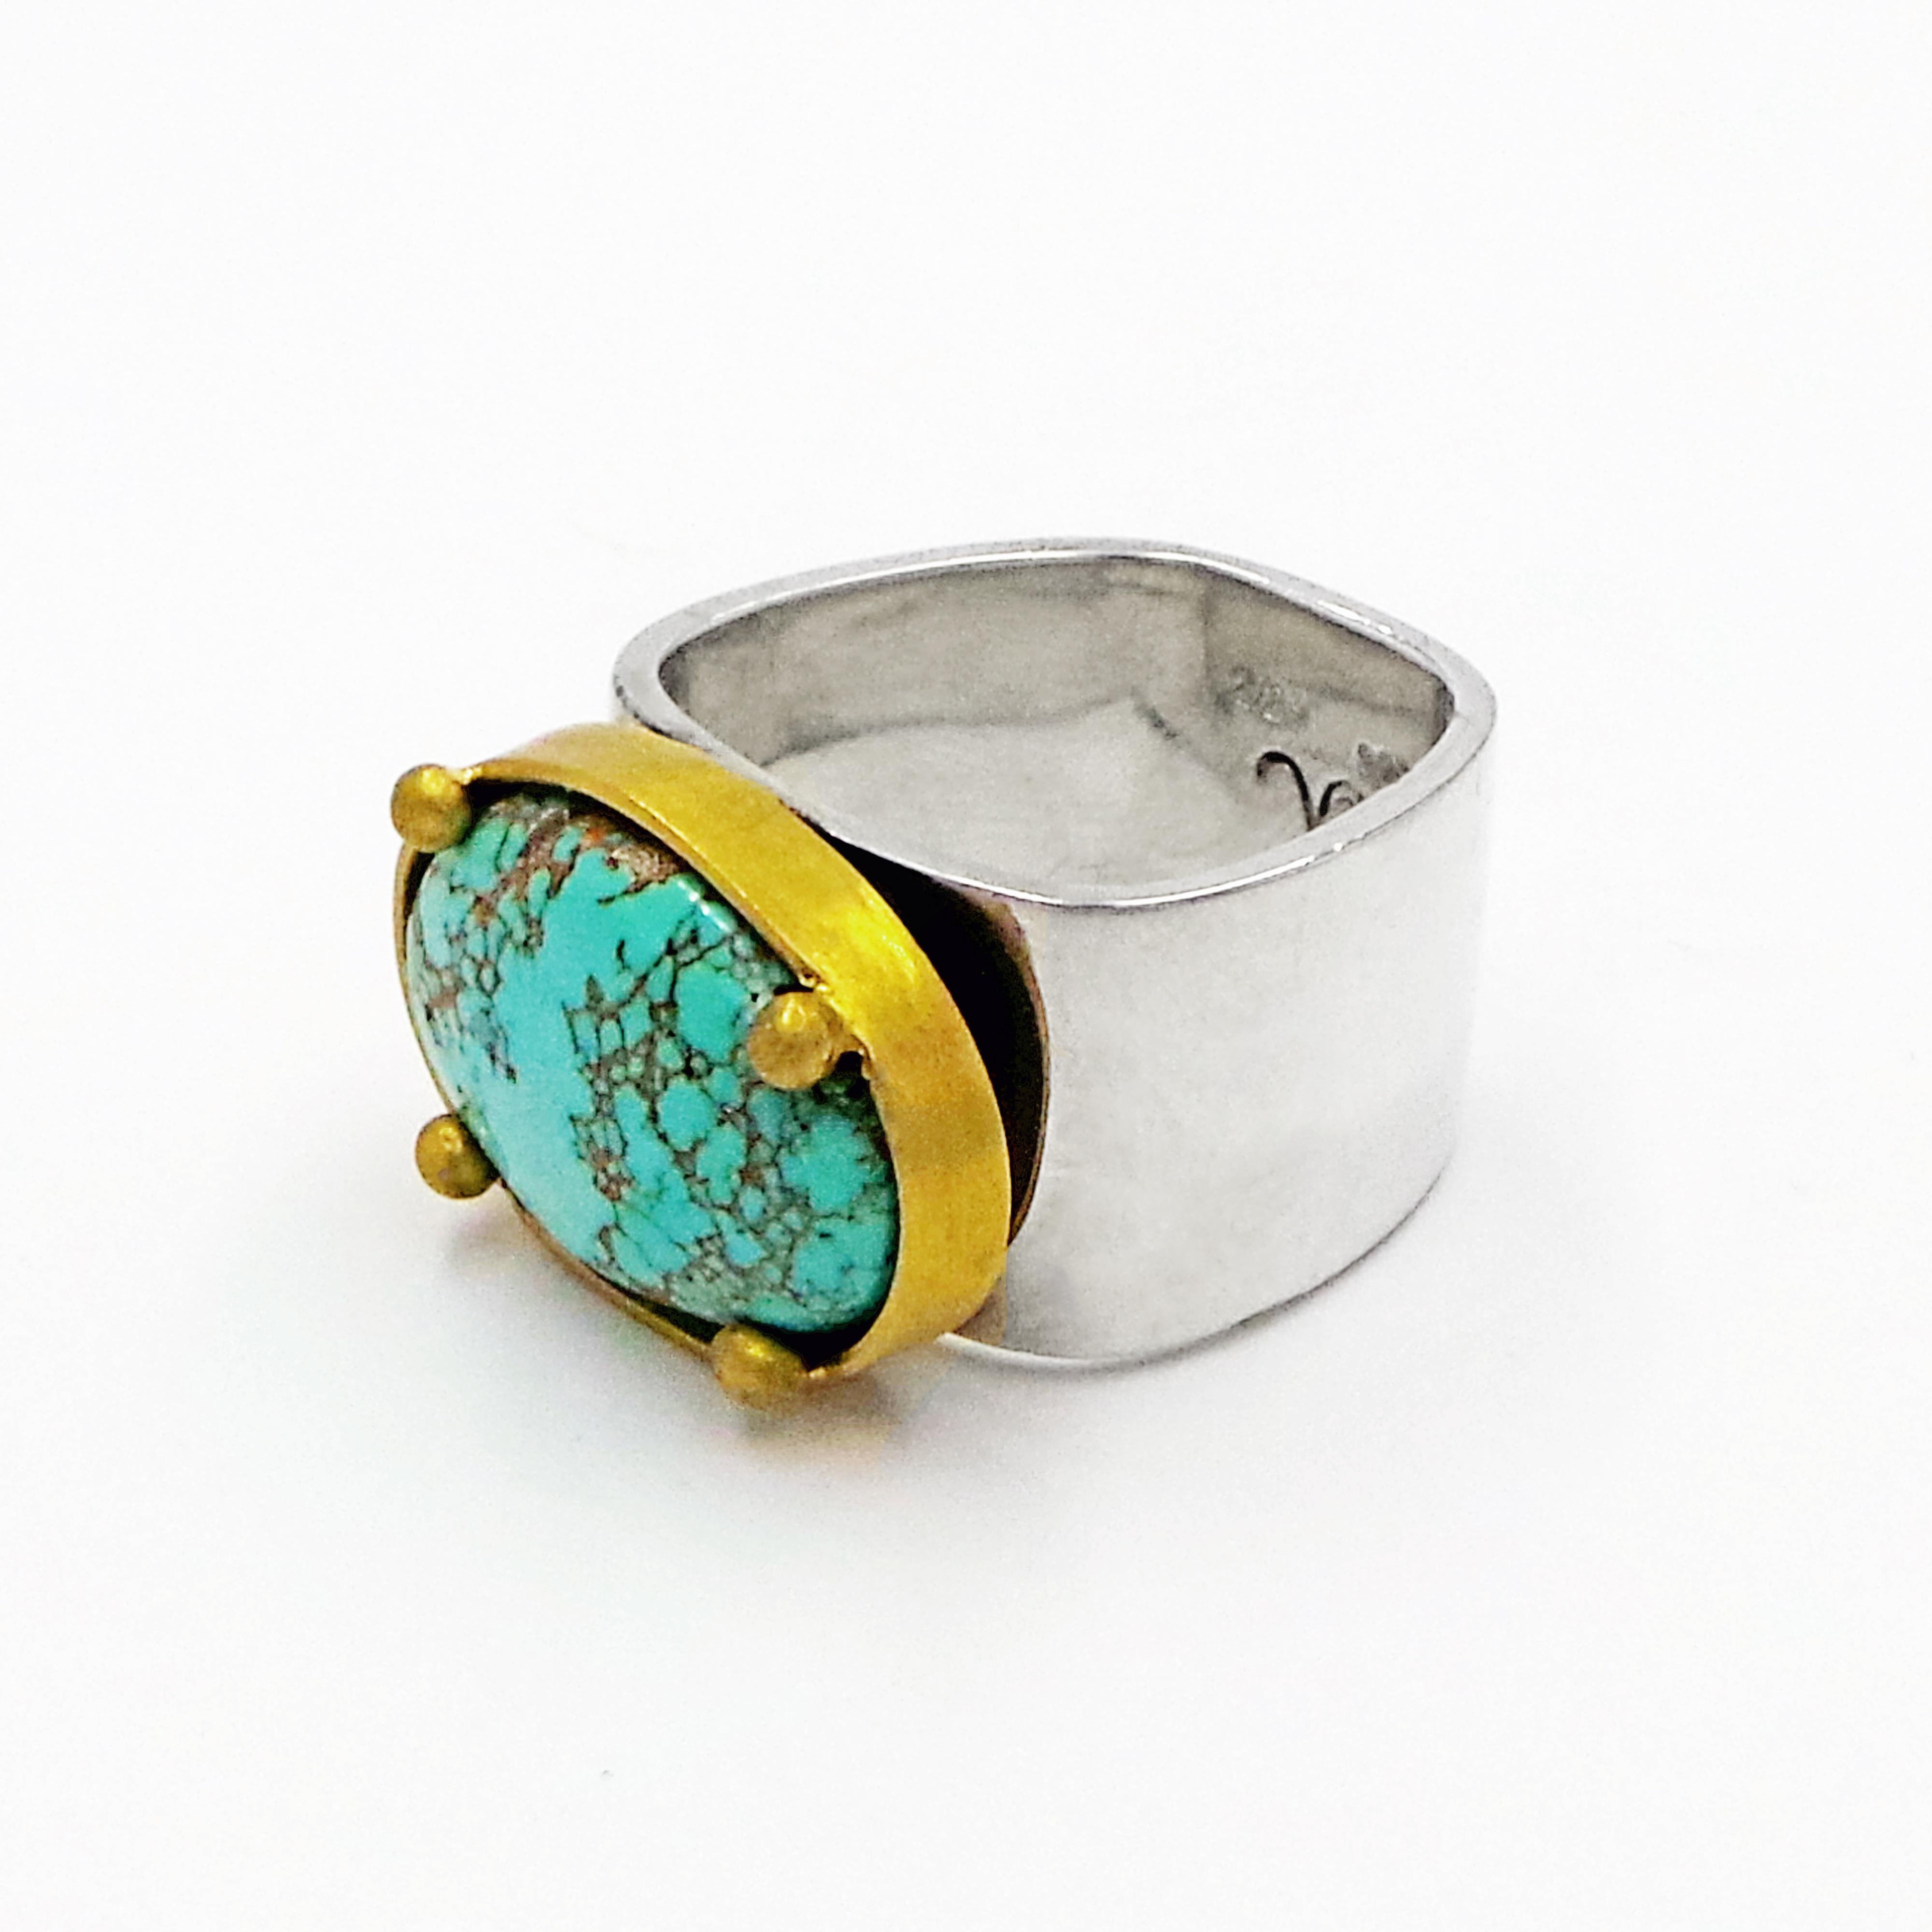 Stunning, blue-green Carico Lake Turquoise (Nevada, USA) set in textured 22k yellow gold bezel with prongs fixed to a sterling silver square shaped band. Ring is size 7. Gemstone's dimensions are 0.75x0.5 inches or 19x13mm. Band is 0.5 inches or